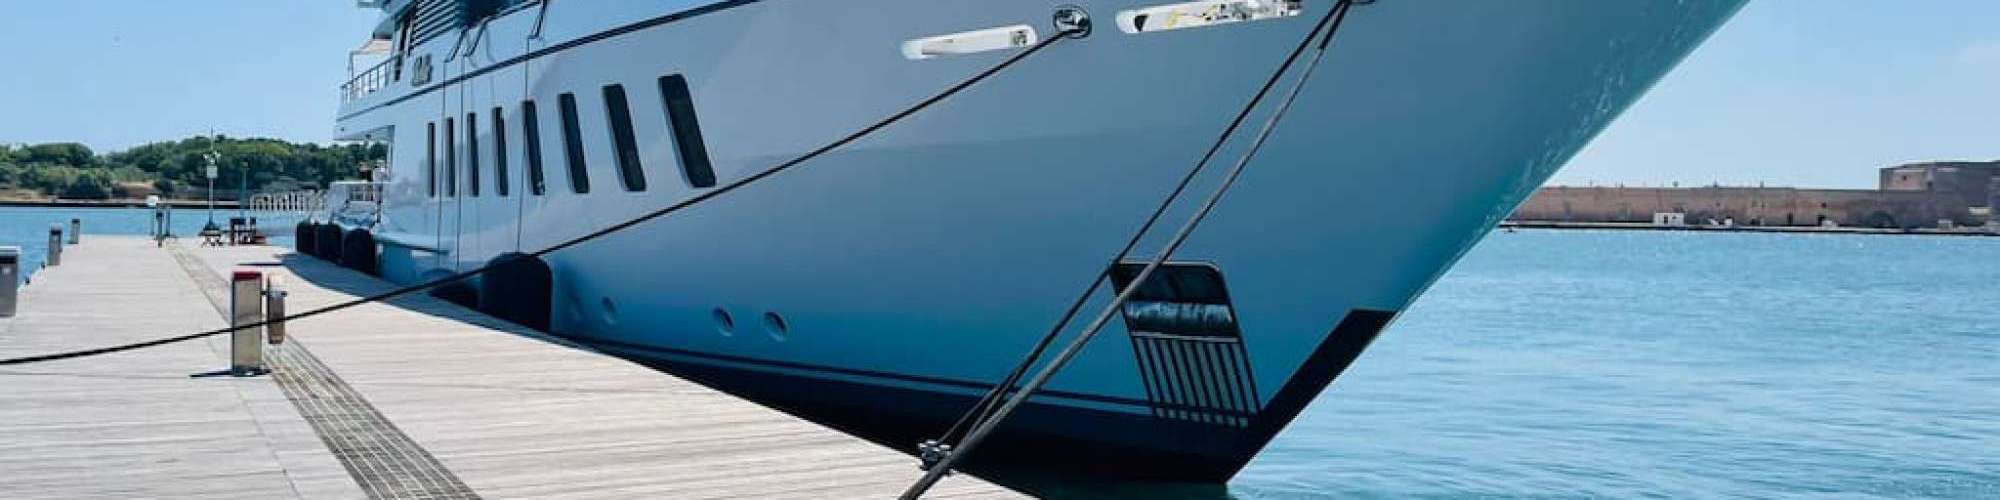 Useful guide of Apulian marinas and ports for yacht captains.